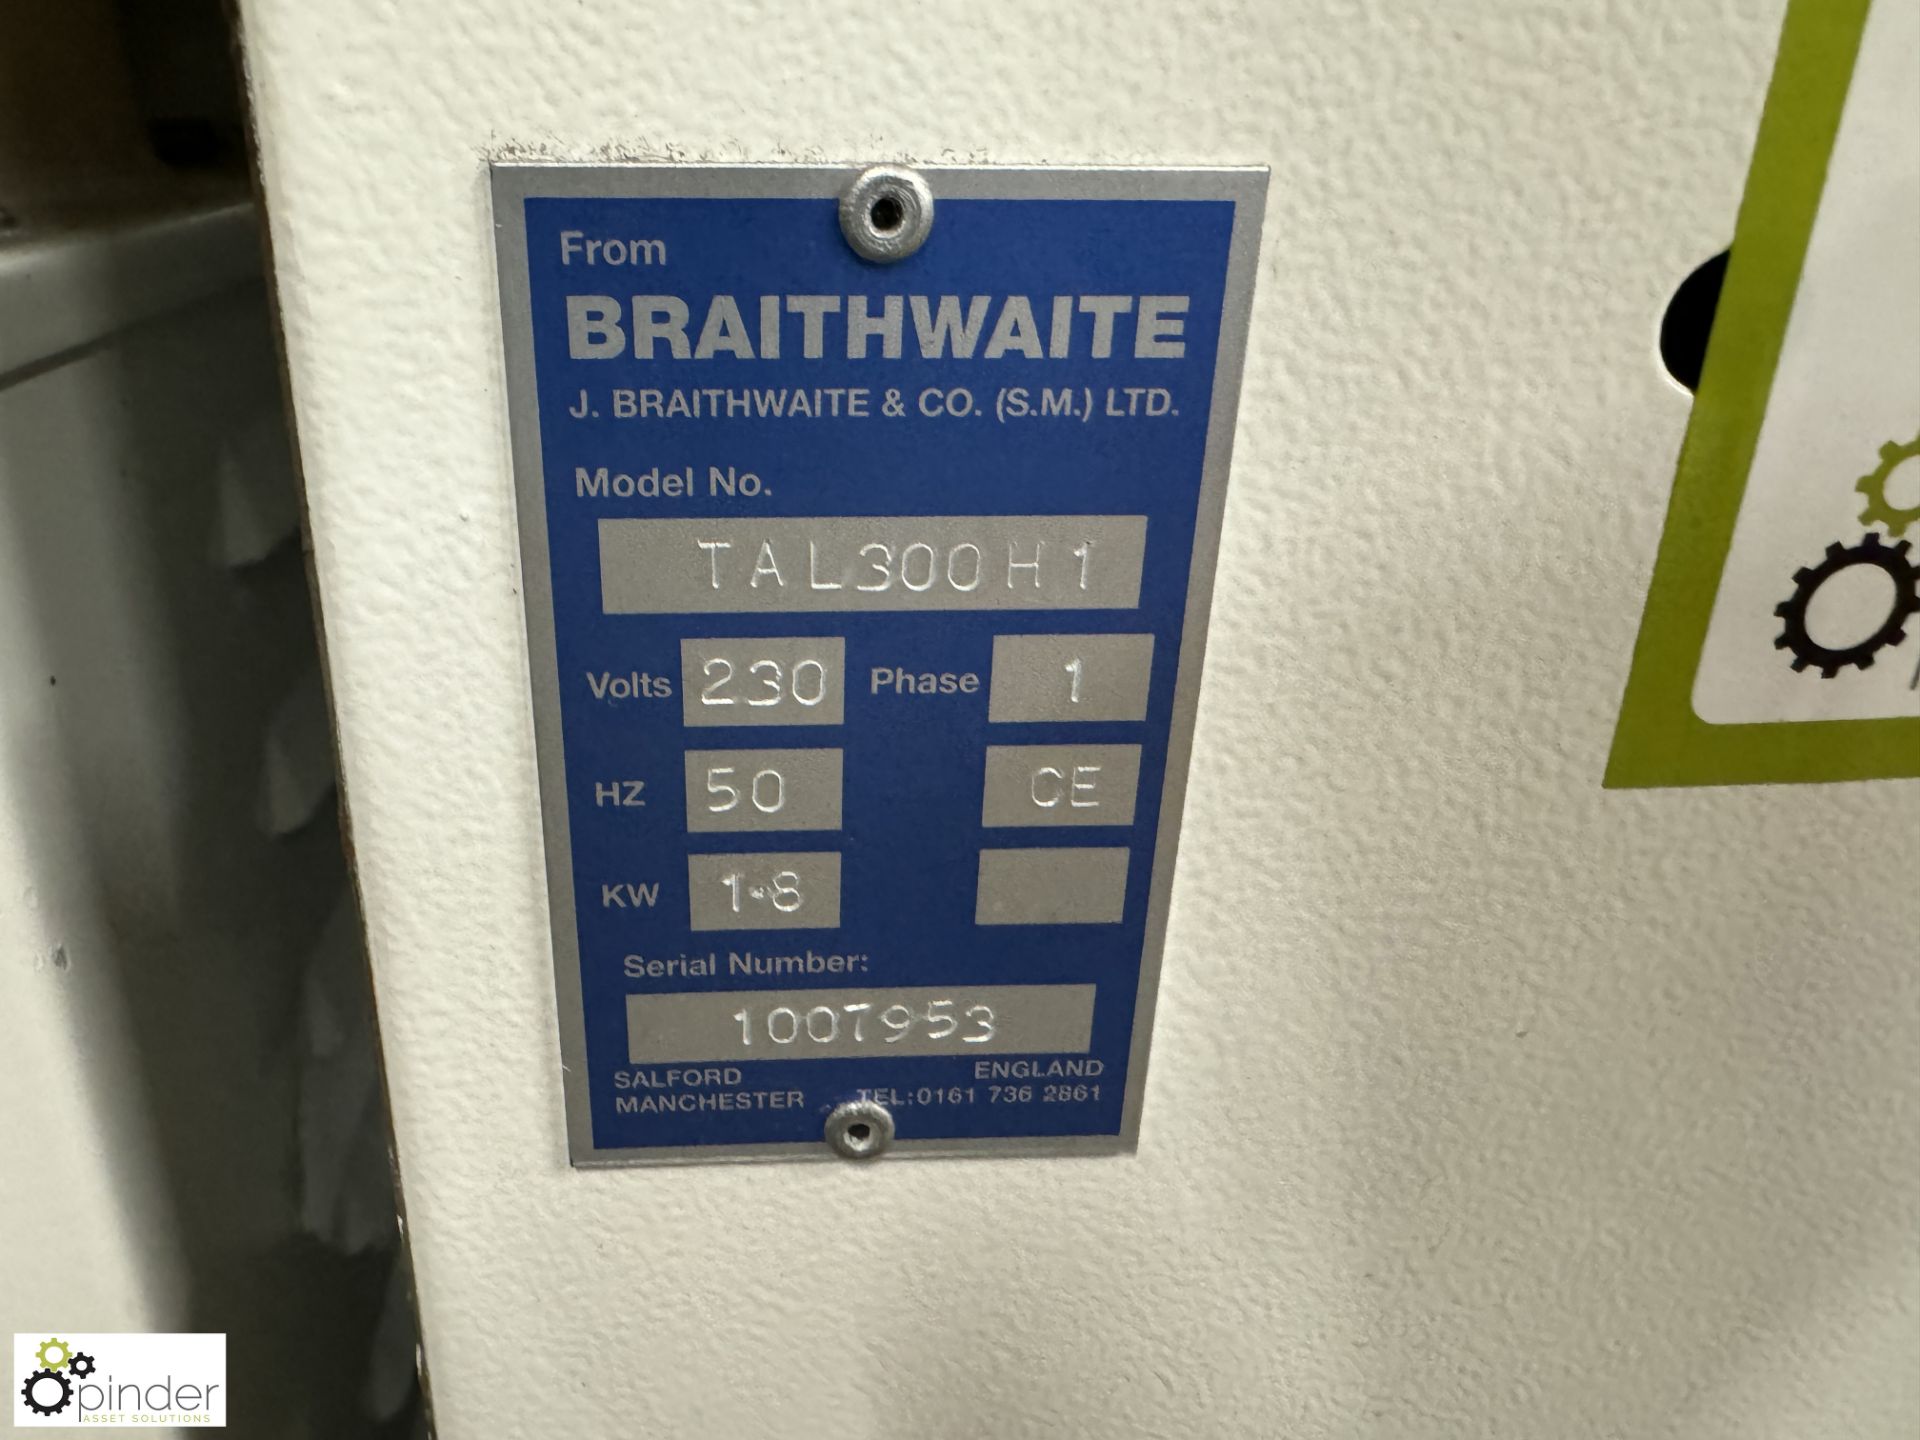 Braithwaite Reverbi Steam Ironing Boiler, with 2 irons and 2 heated ironing tables, 240volts, with - Image 8 of 9